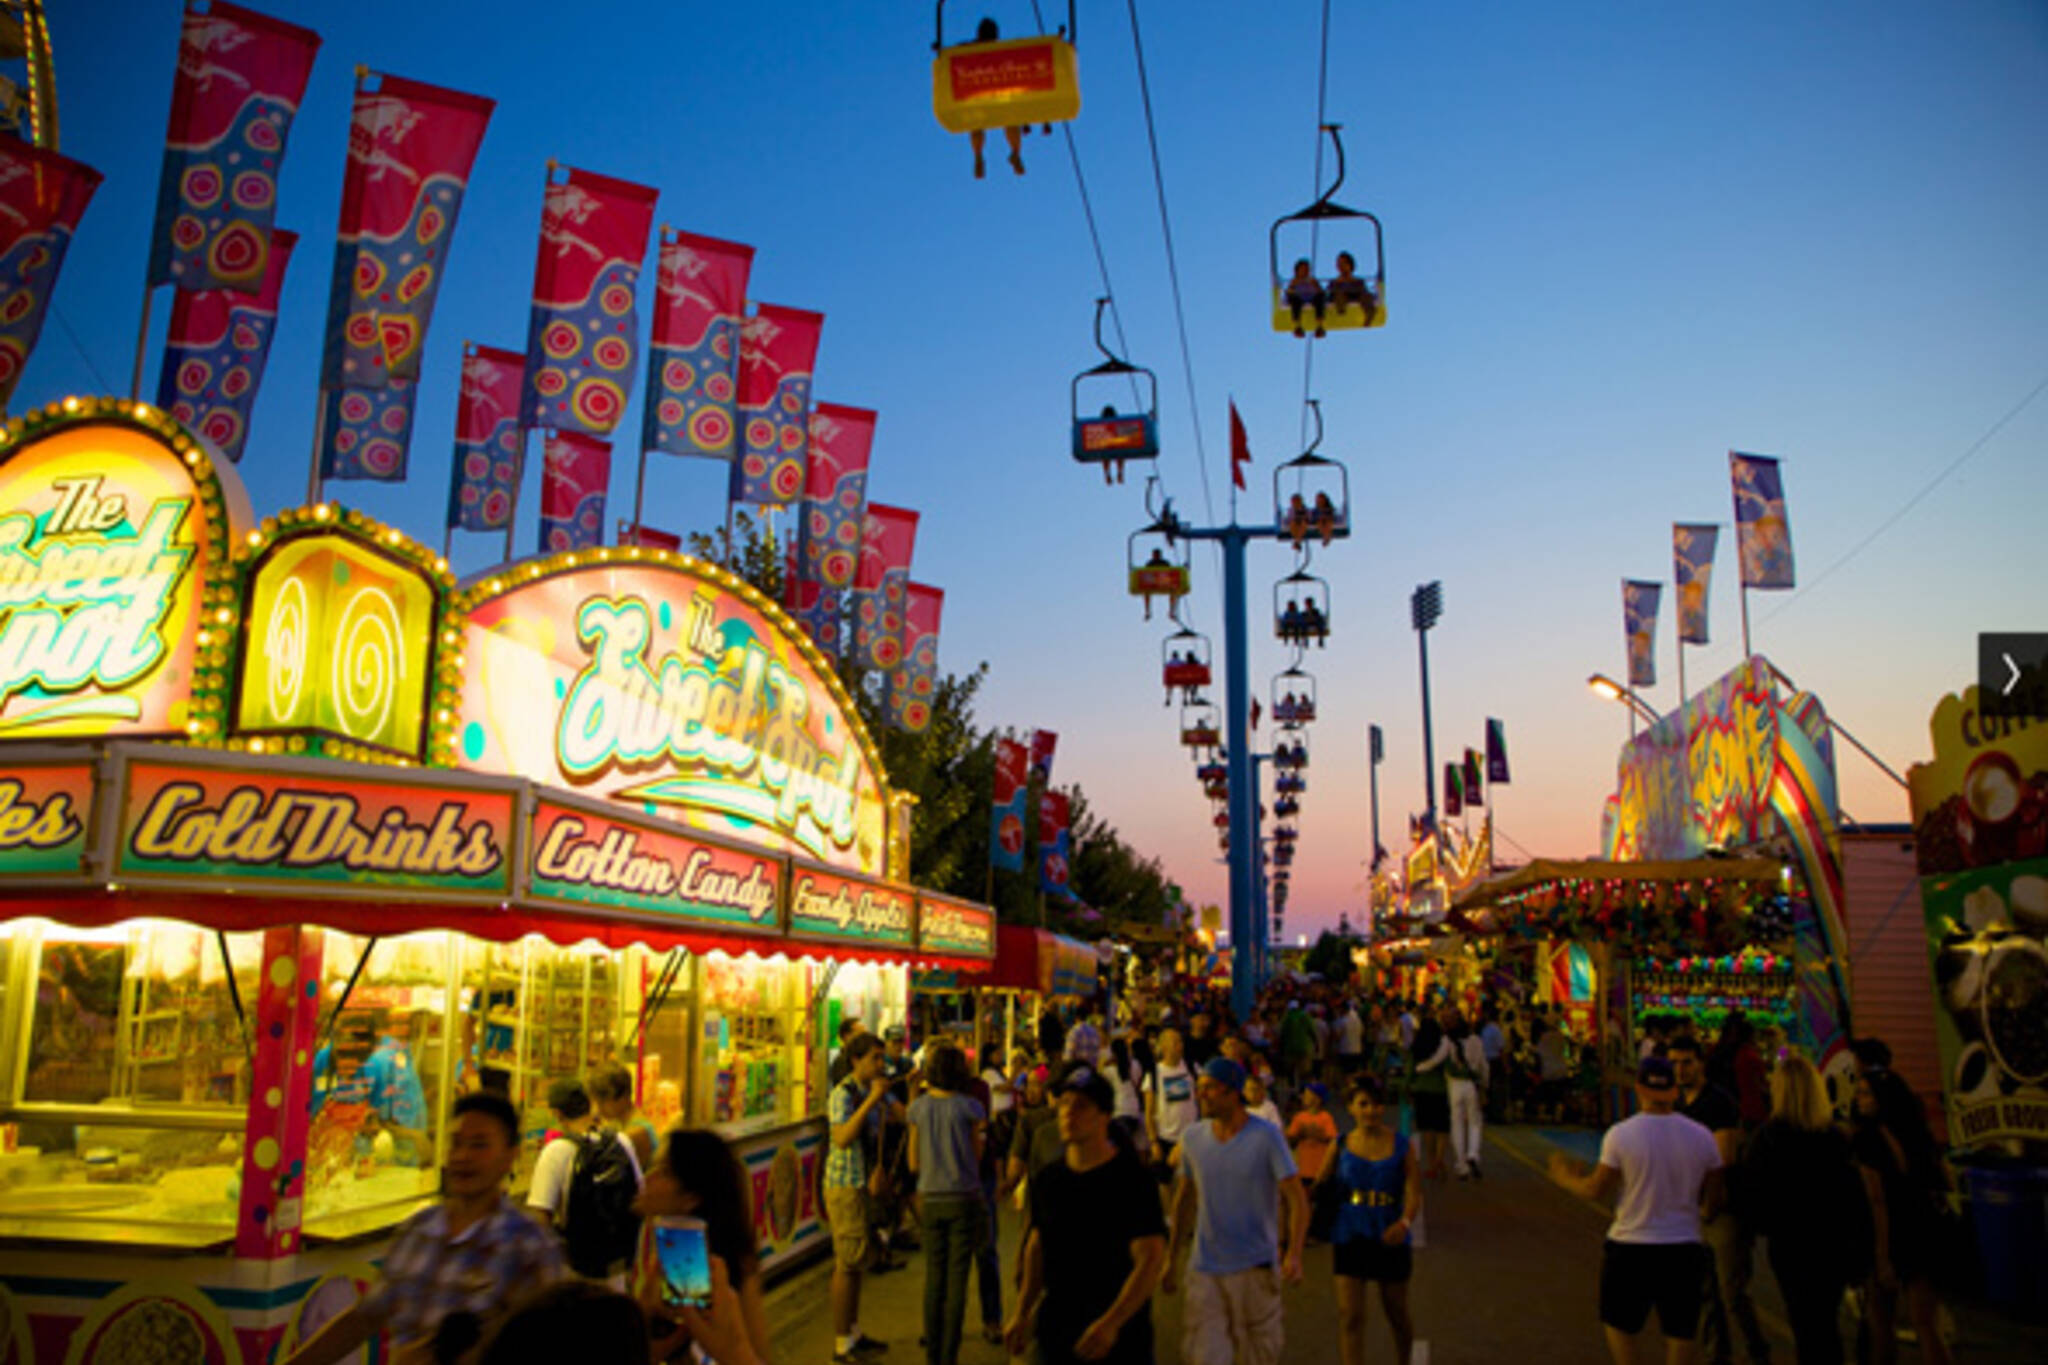 Midway CNE